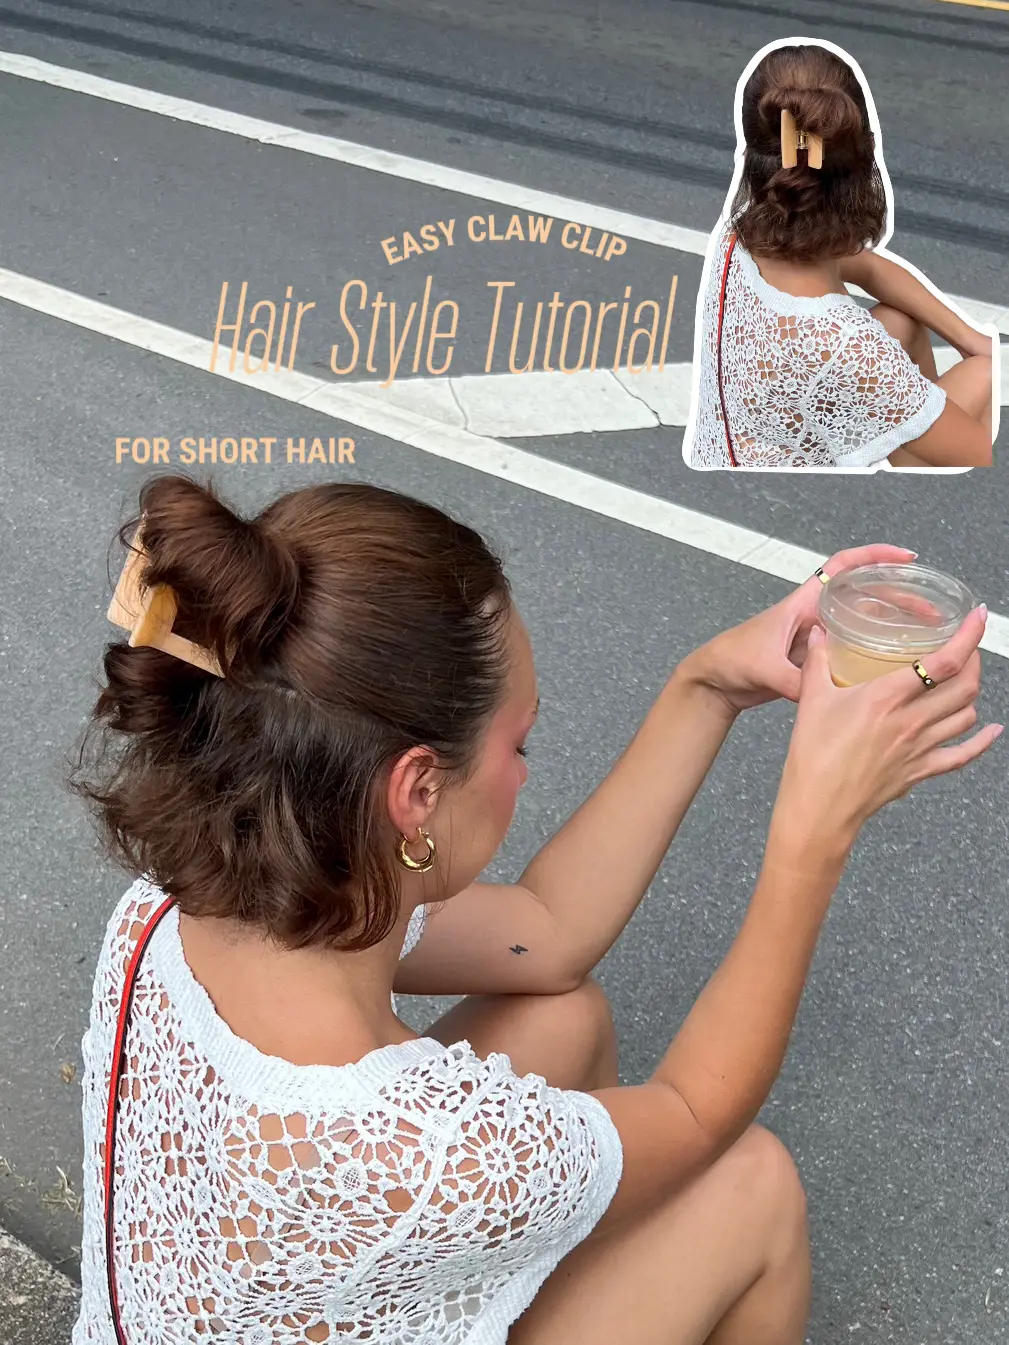 Claw clip tutorial for thick natural hair 🥰 #clawclip